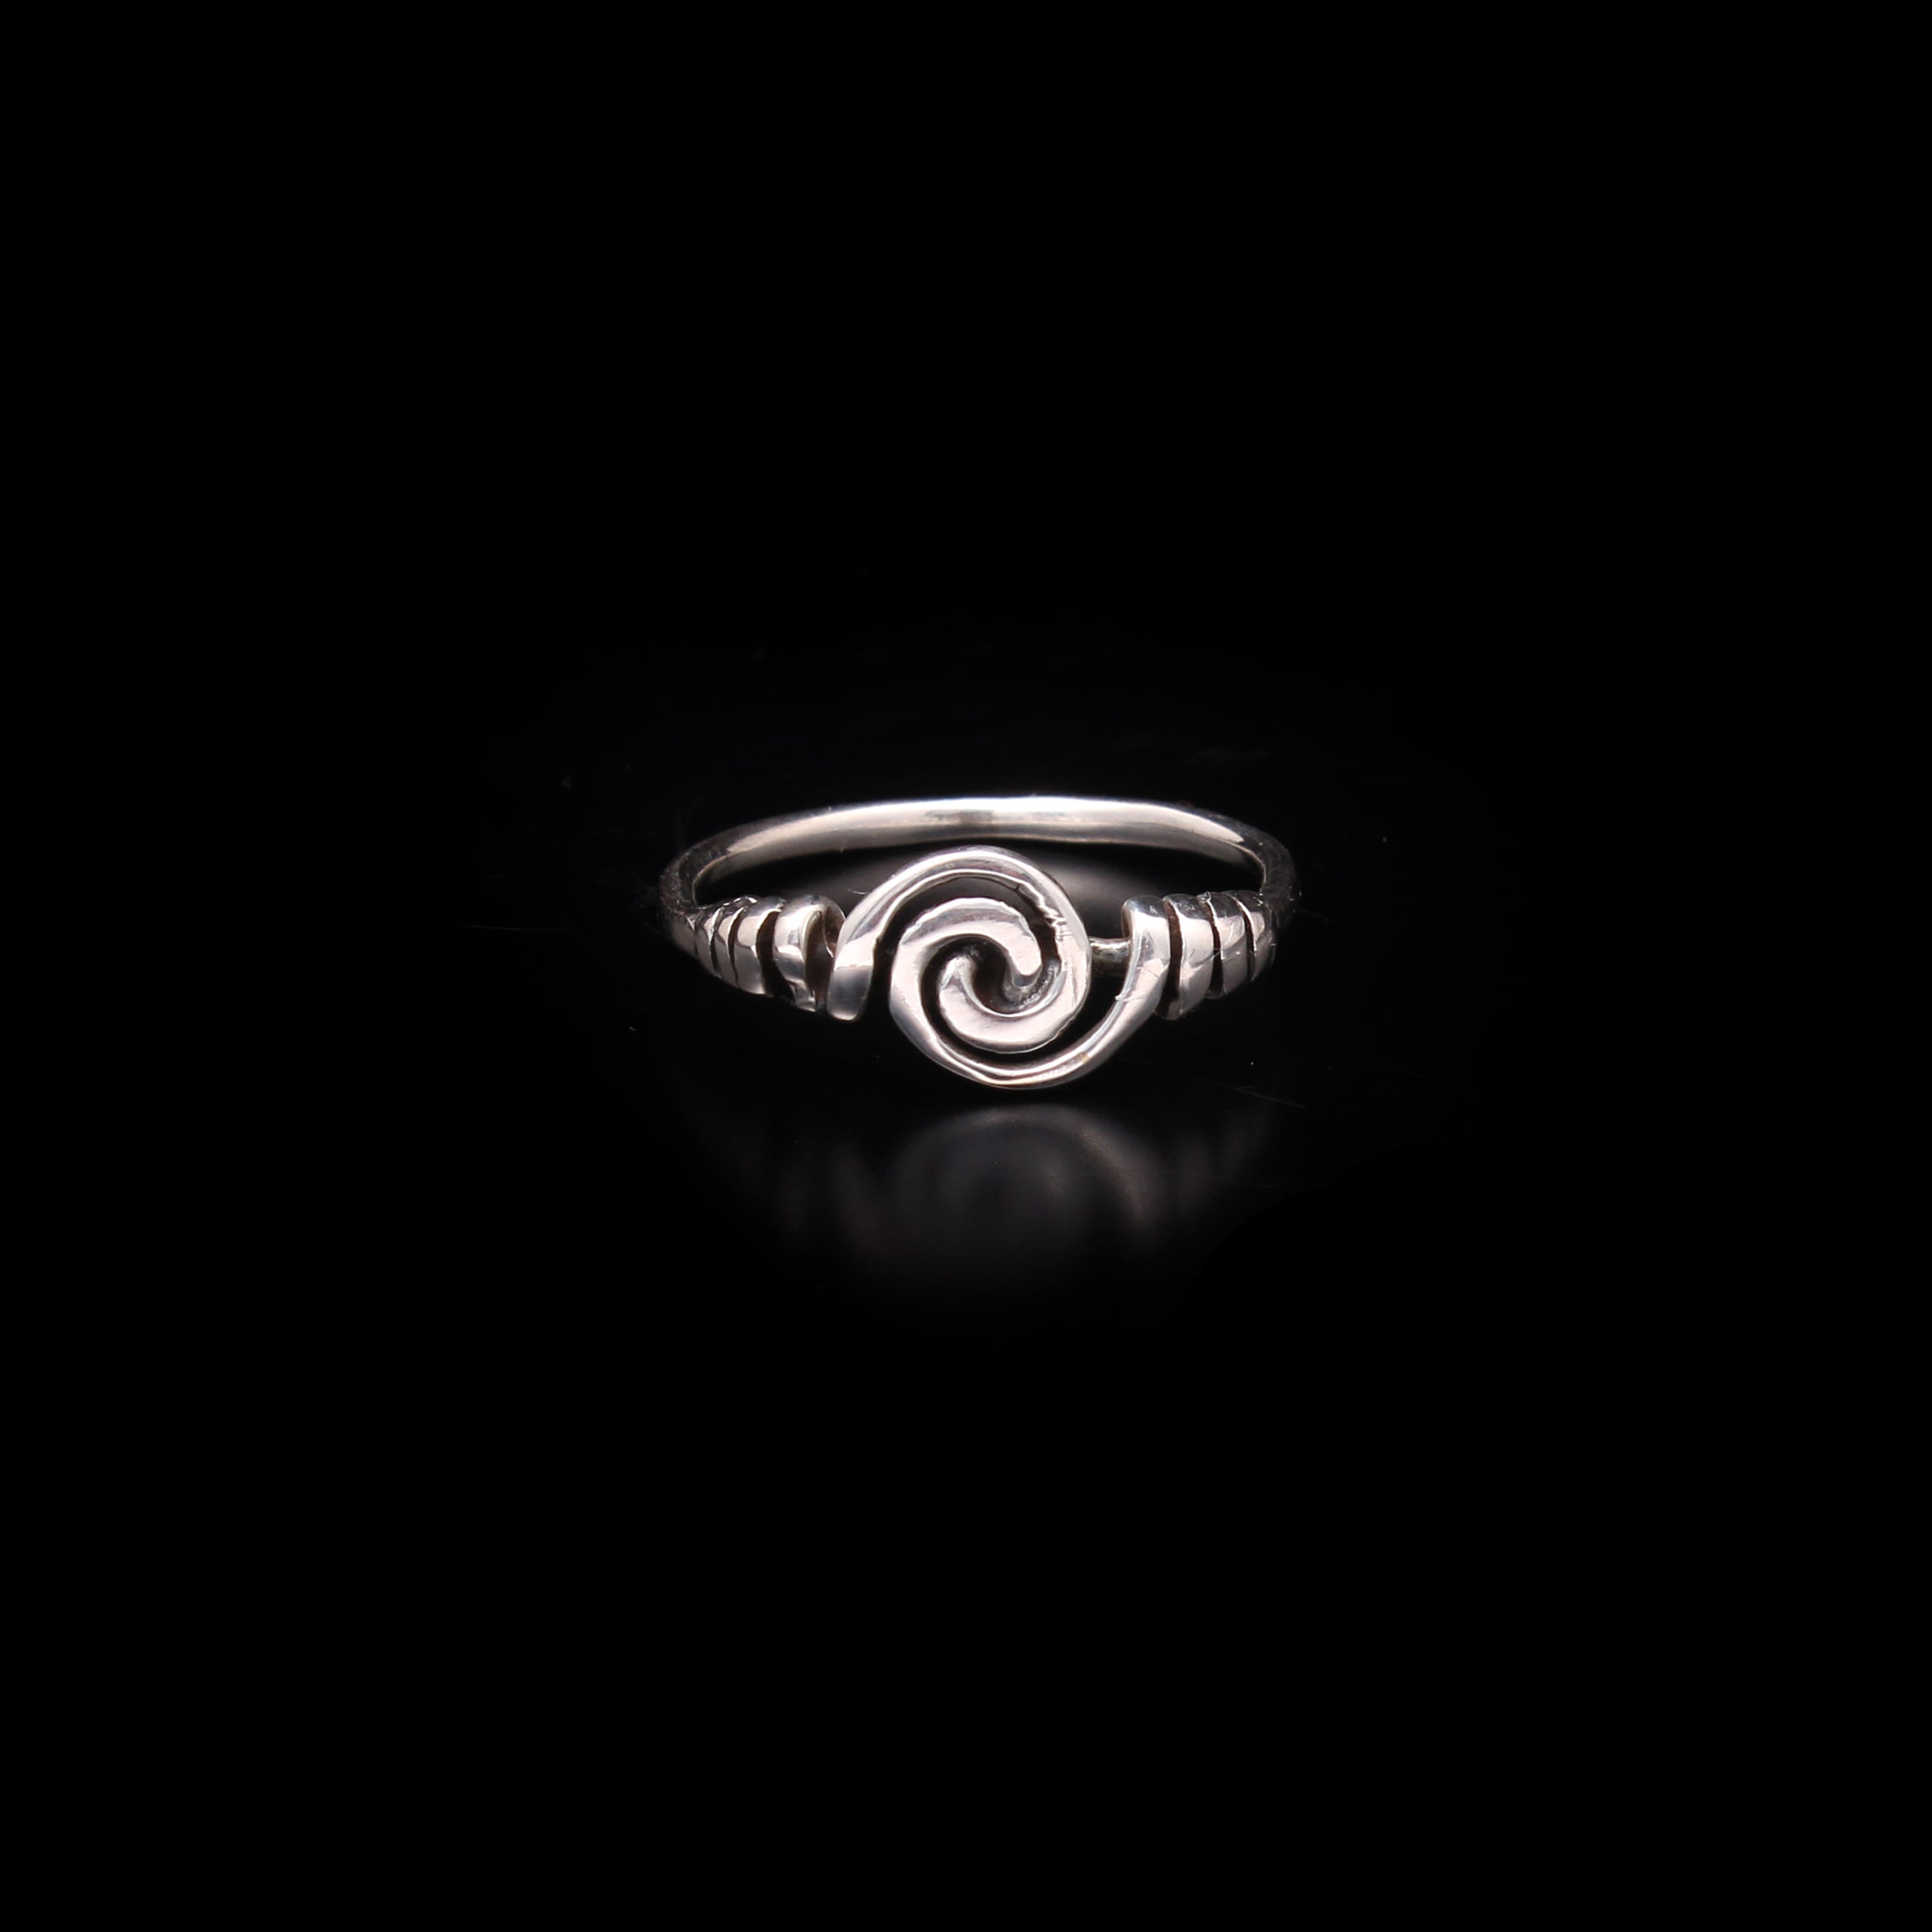 Enchanted Forest Silver Spiral Ring | Wire work jewelry, Wire jewelry  designs, Jewelry